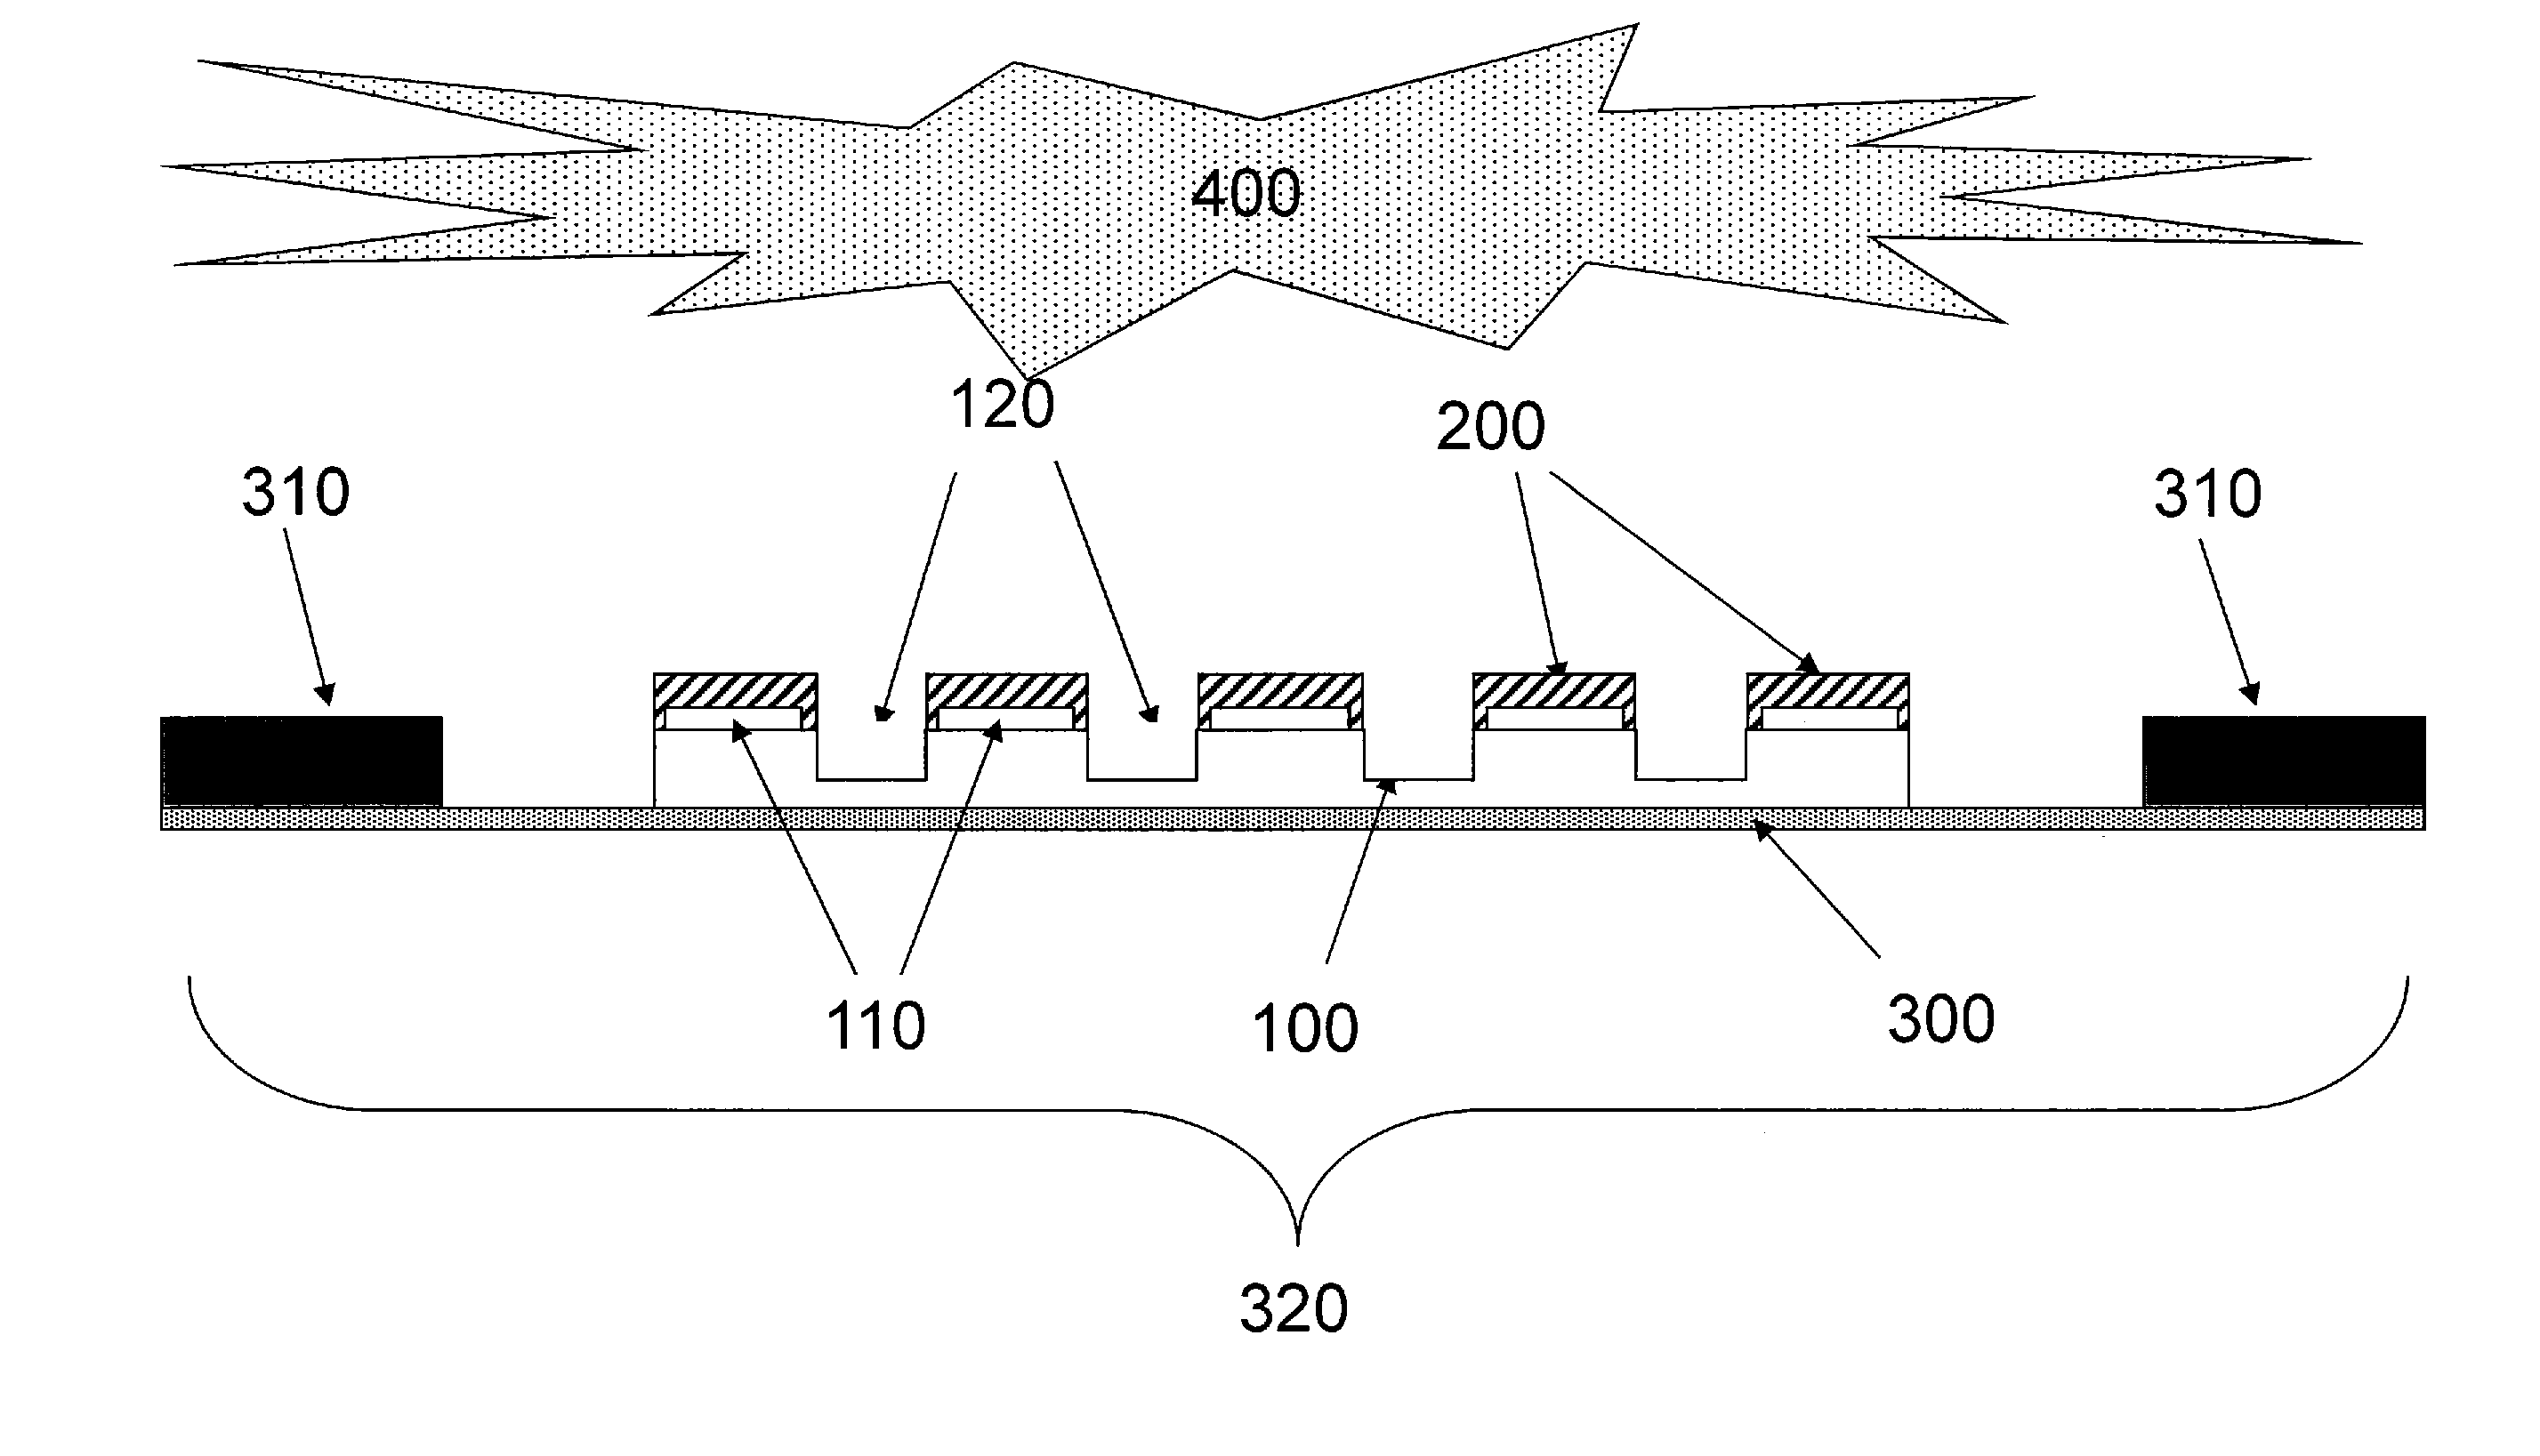 Method and Apparatus for Plasma Dicing a Semi-Conductor Wafer